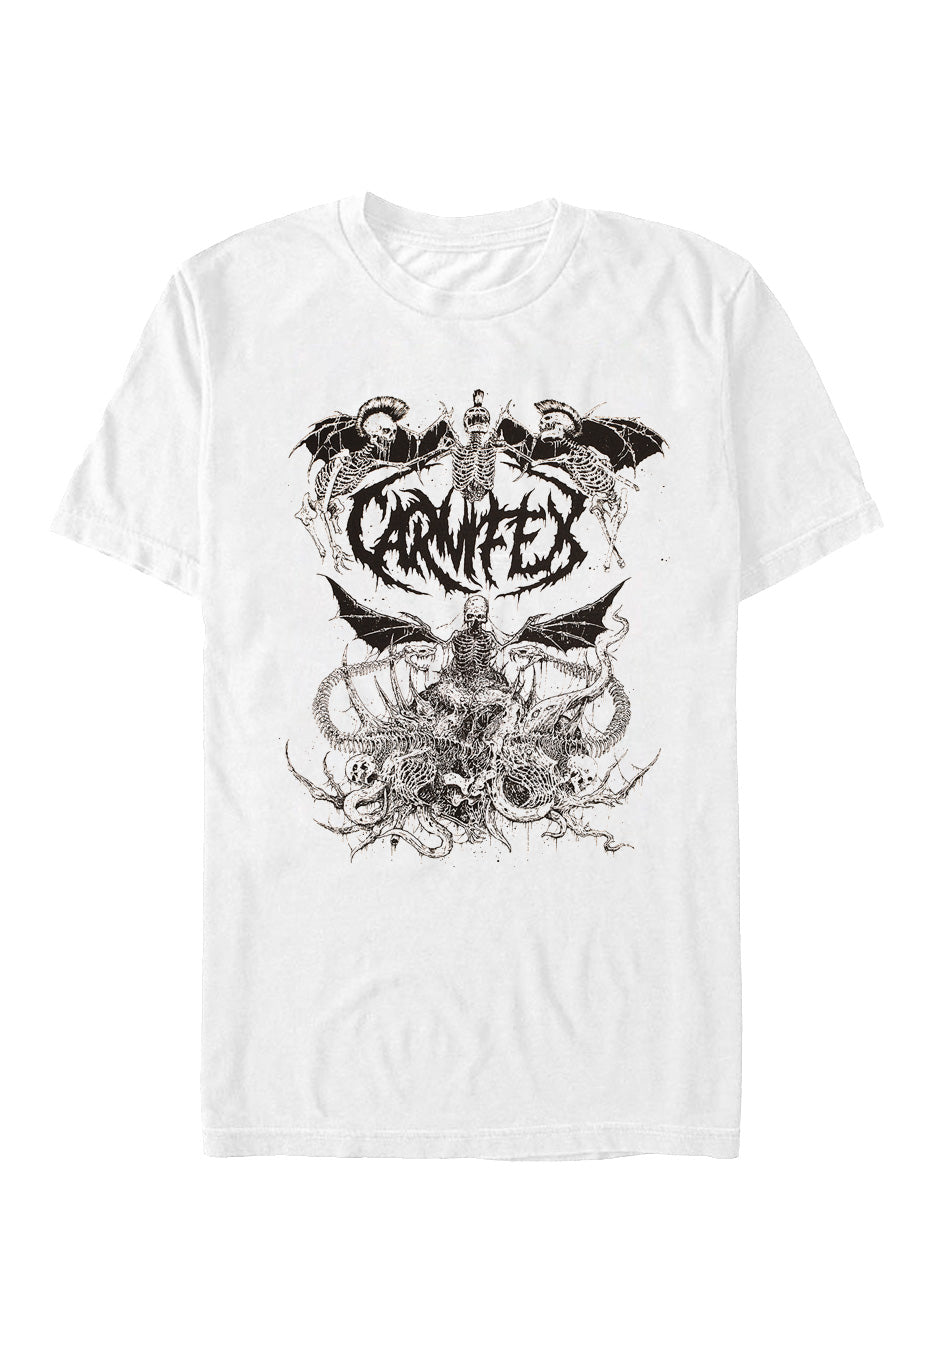 Carnifex - Closer To Hell White - T-Shirt